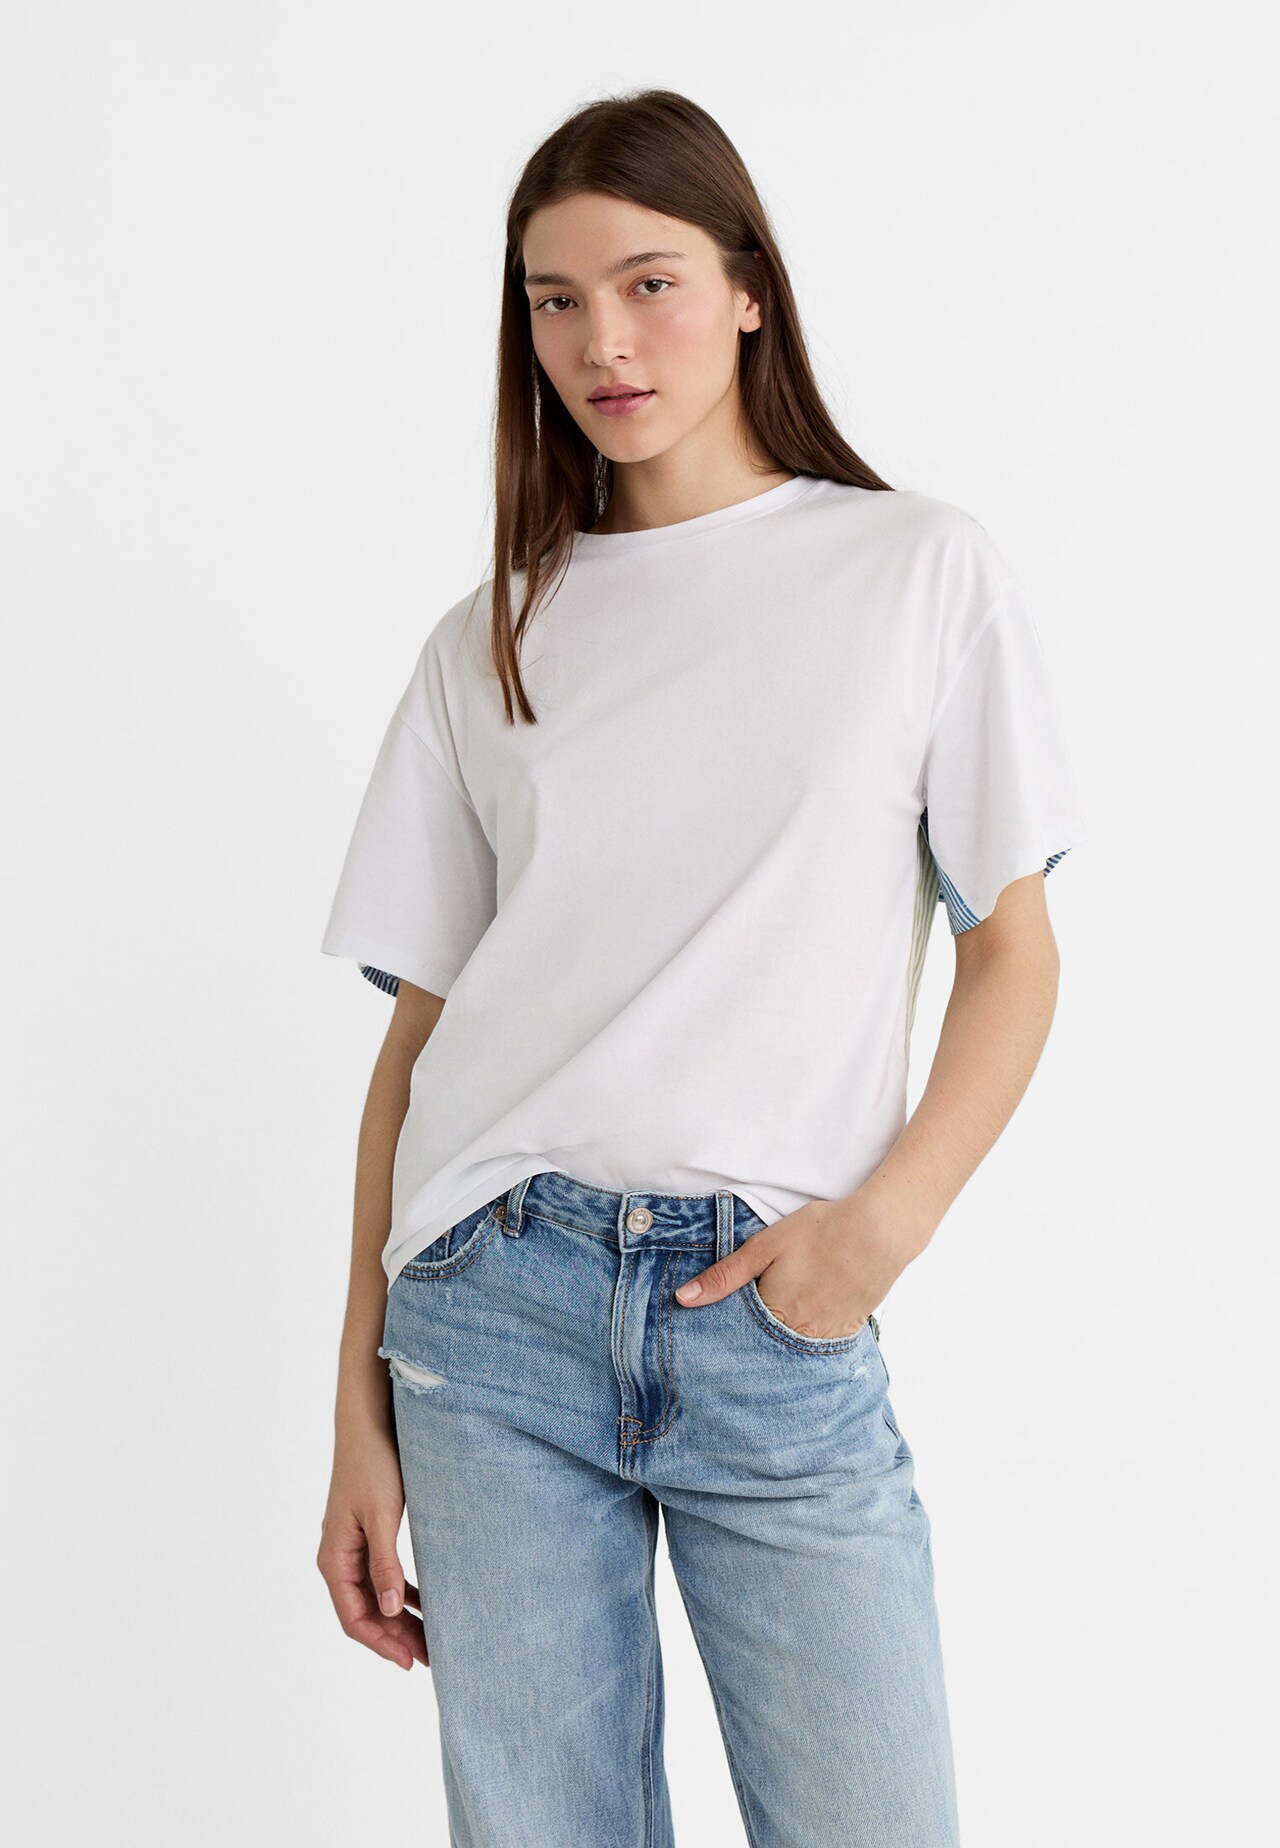 Flowing T-shirt with contrast back - Women's fashion